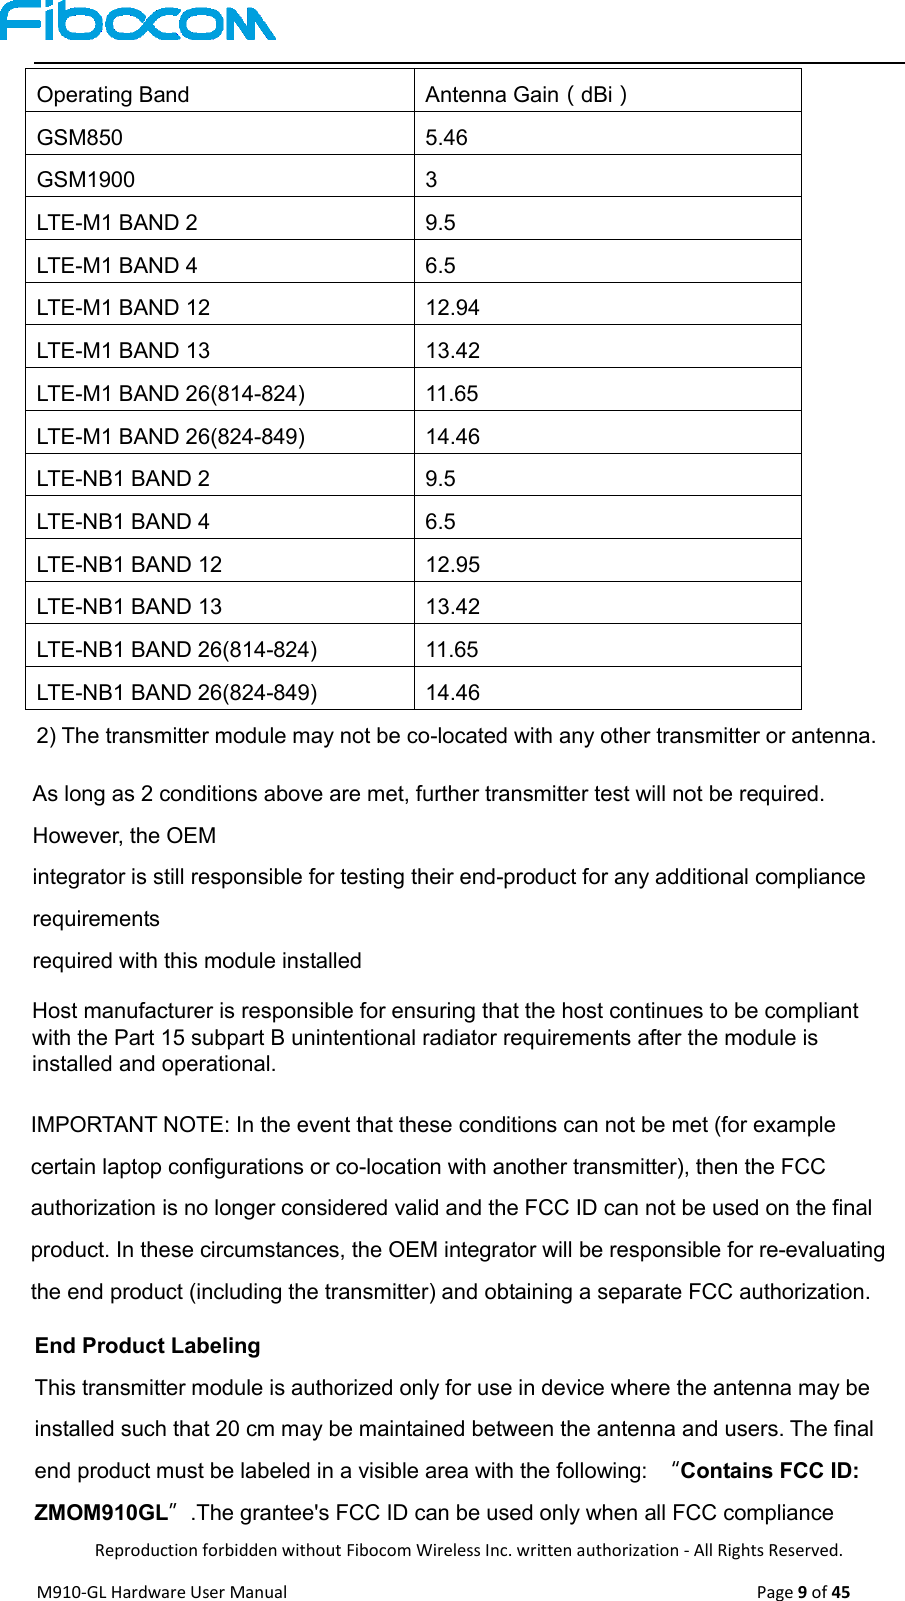 Reproduction forbidden without Fibocom Wireless Inc. written authorization - All Rights Reserved. M910-GL Hardware User Manual    Page 9 of 45 Operating Band Antenna Gain（dBi） GSM850 5.46 GSM1900 3 LTE-M1 BAND 2 9.5 LTE-M1 BAND 4 6.5 LTE-M1 BAND 12 12.94 LTE-M1 BAND 13 13.42 LTE-M1 BAND 26(814-824) 11.65 LTE-M1 BAND 26(824-849) 14.46 LTE-NB1 BAND 2 9.5 LTE-NB1 BAND 4 6.5 LTE-NB1 BAND 12 12.95 LTE-NB1 BAND 13 13.42 LTE-NB1 BAND 26(814-824) 11.65 LTE-NB1 BAND 26(824-849) 14.46 2) The transmitter module may not be co-located with any other transmitter or antenna.As long as 2 conditions above are met, further transmitter test will not be required. However, the OEM integrator is still responsible for testing their end-product for any additional compliance requirements required with this module installed IMPORTANT NOTE: In the event that these conditions can not be met (for example certain laptop configurations or co-location with another transmitter), then the FCC authorization is no longer considered valid and the FCC ID can not be used on the final product. In these circumstances, the OEM integrator will be responsible for re-evaluating the end product (including the transmitter) and obtaining a separate FCC authorization. End Product Labeling This transmitter module is authorized only for use in device where the antenna may be installed such that 20 cm may be maintained between the antenna and users. The final end product must be labeled in a visible area with the following:  “Contains FCC ID: ZMOM910GL”.The grantee&apos;s FCC ID can be used only when all FCC compliance Host manufacturer is responsible for ensuring that the host continues to be compliant with the Part 15 subpart B unintentional radiator requirements after the module is installed and operational.